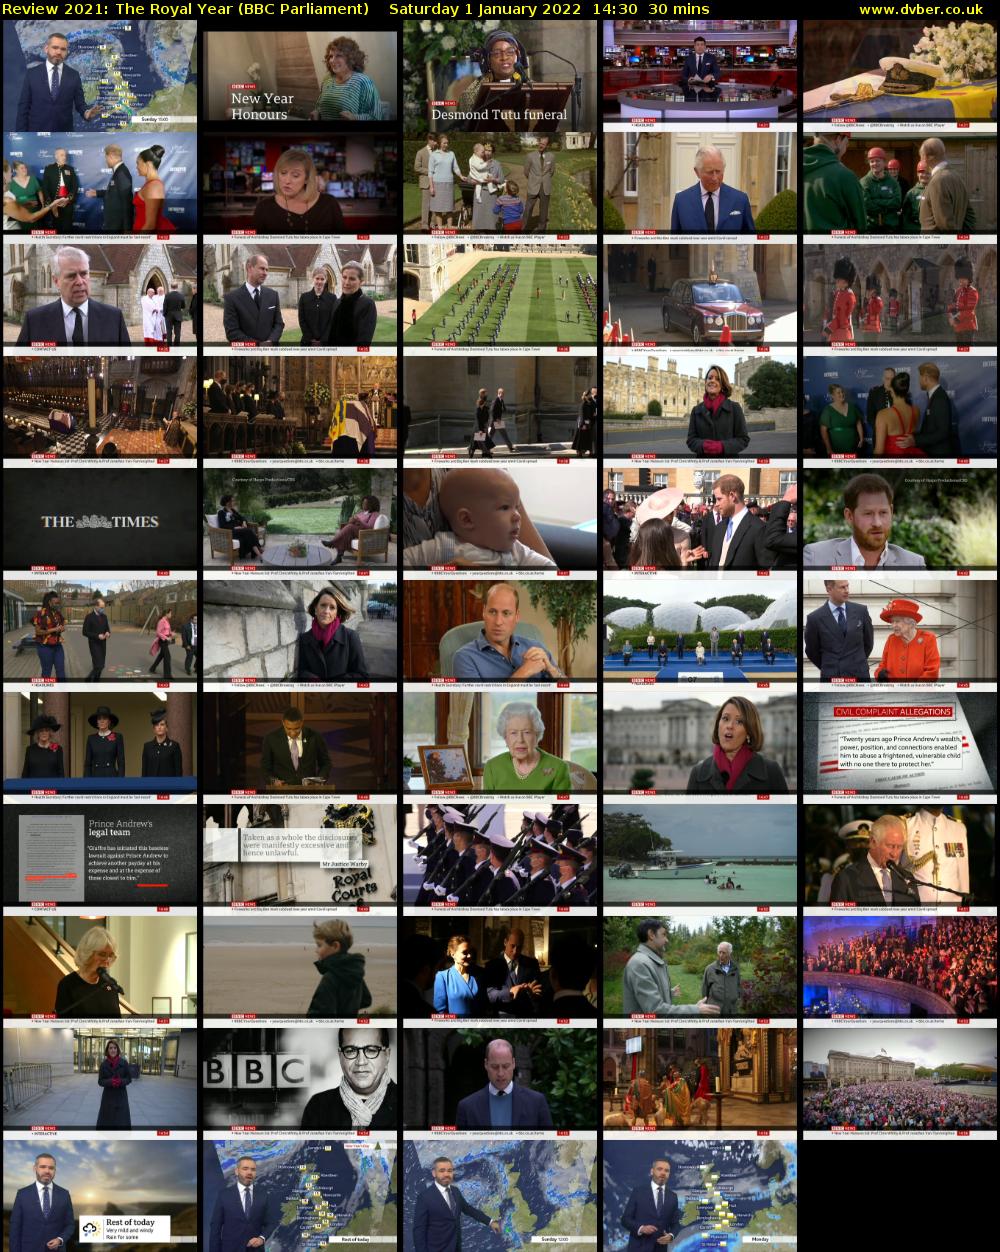 Review 2021: The Royal Year (BBC Parliament) Saturday 1 January 2022 14:30 - 15:00